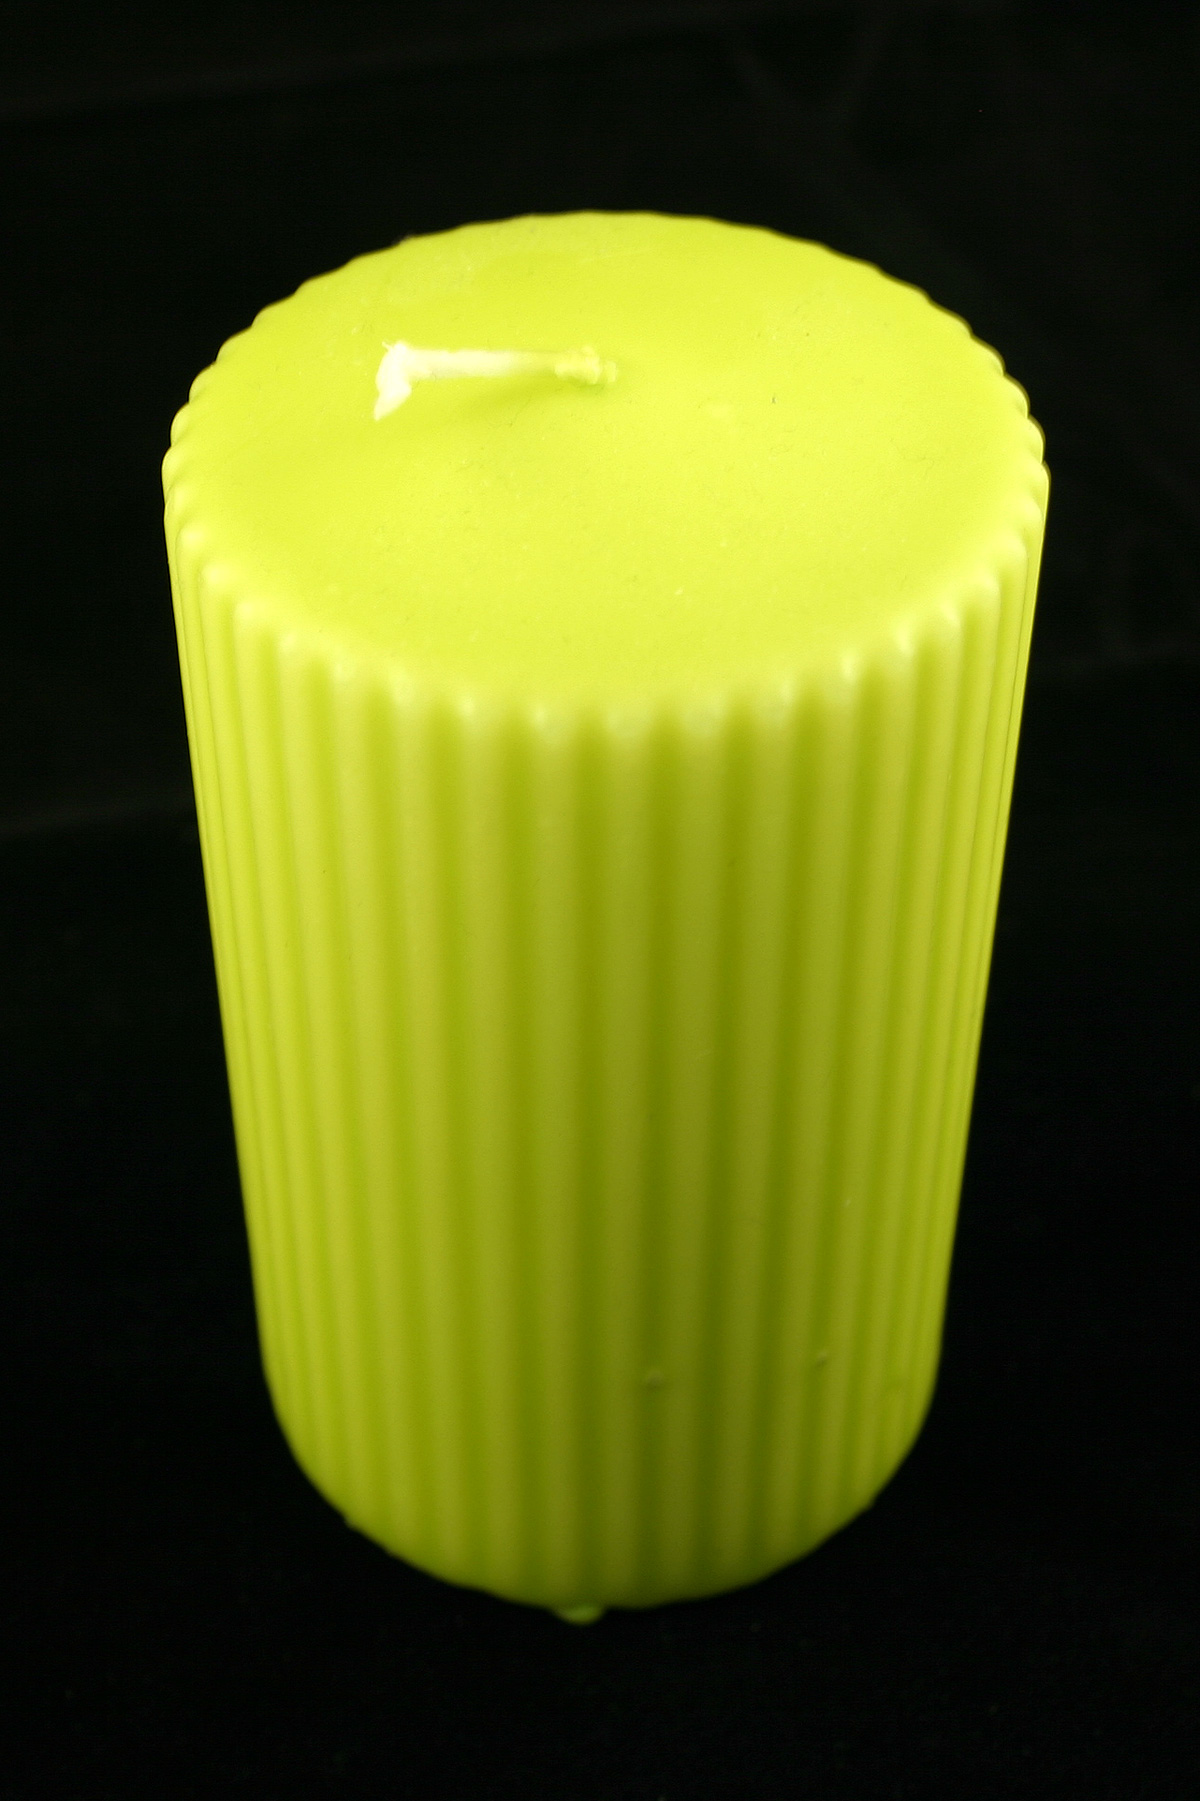 Lime colored candle photo